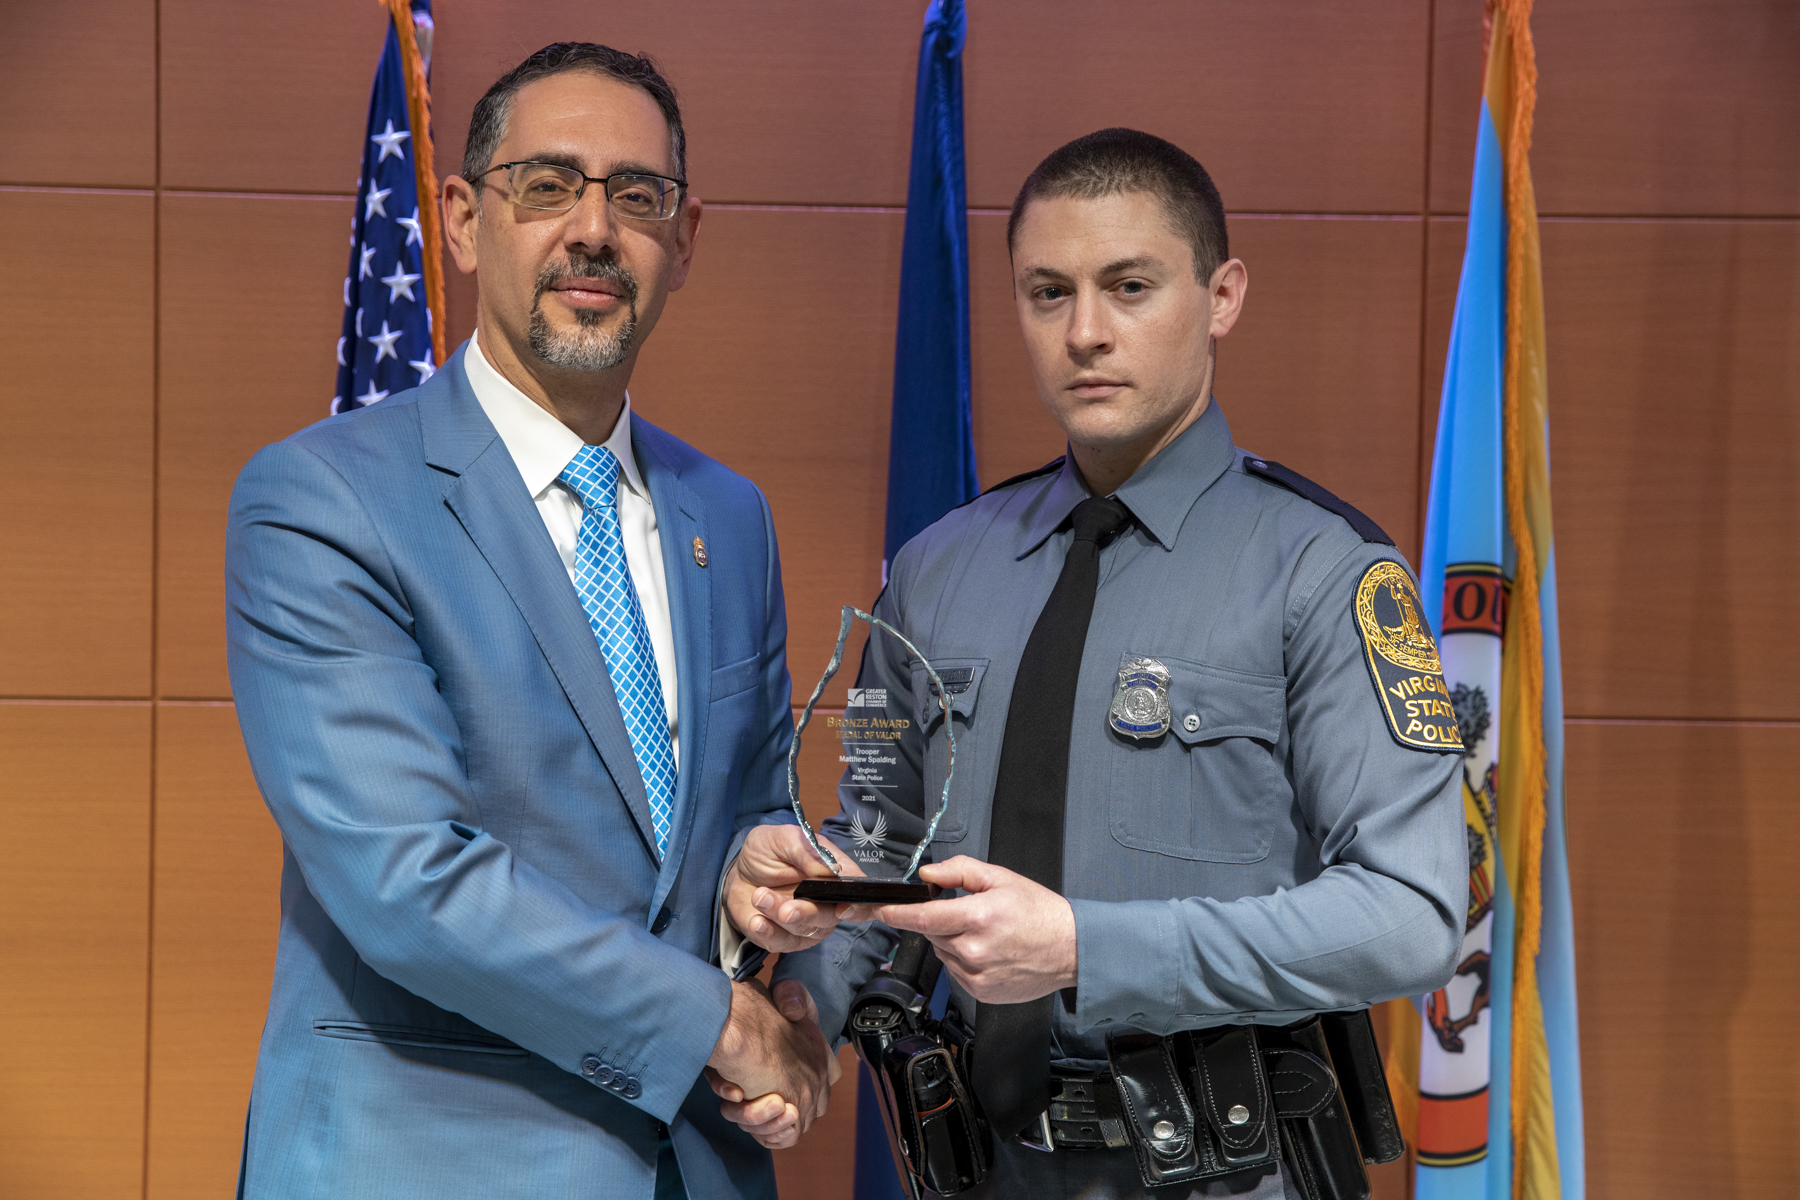 Joey Musmar, presents the Bronze Medal of Valor to Fairfax County Police Department and Virginia State Police.